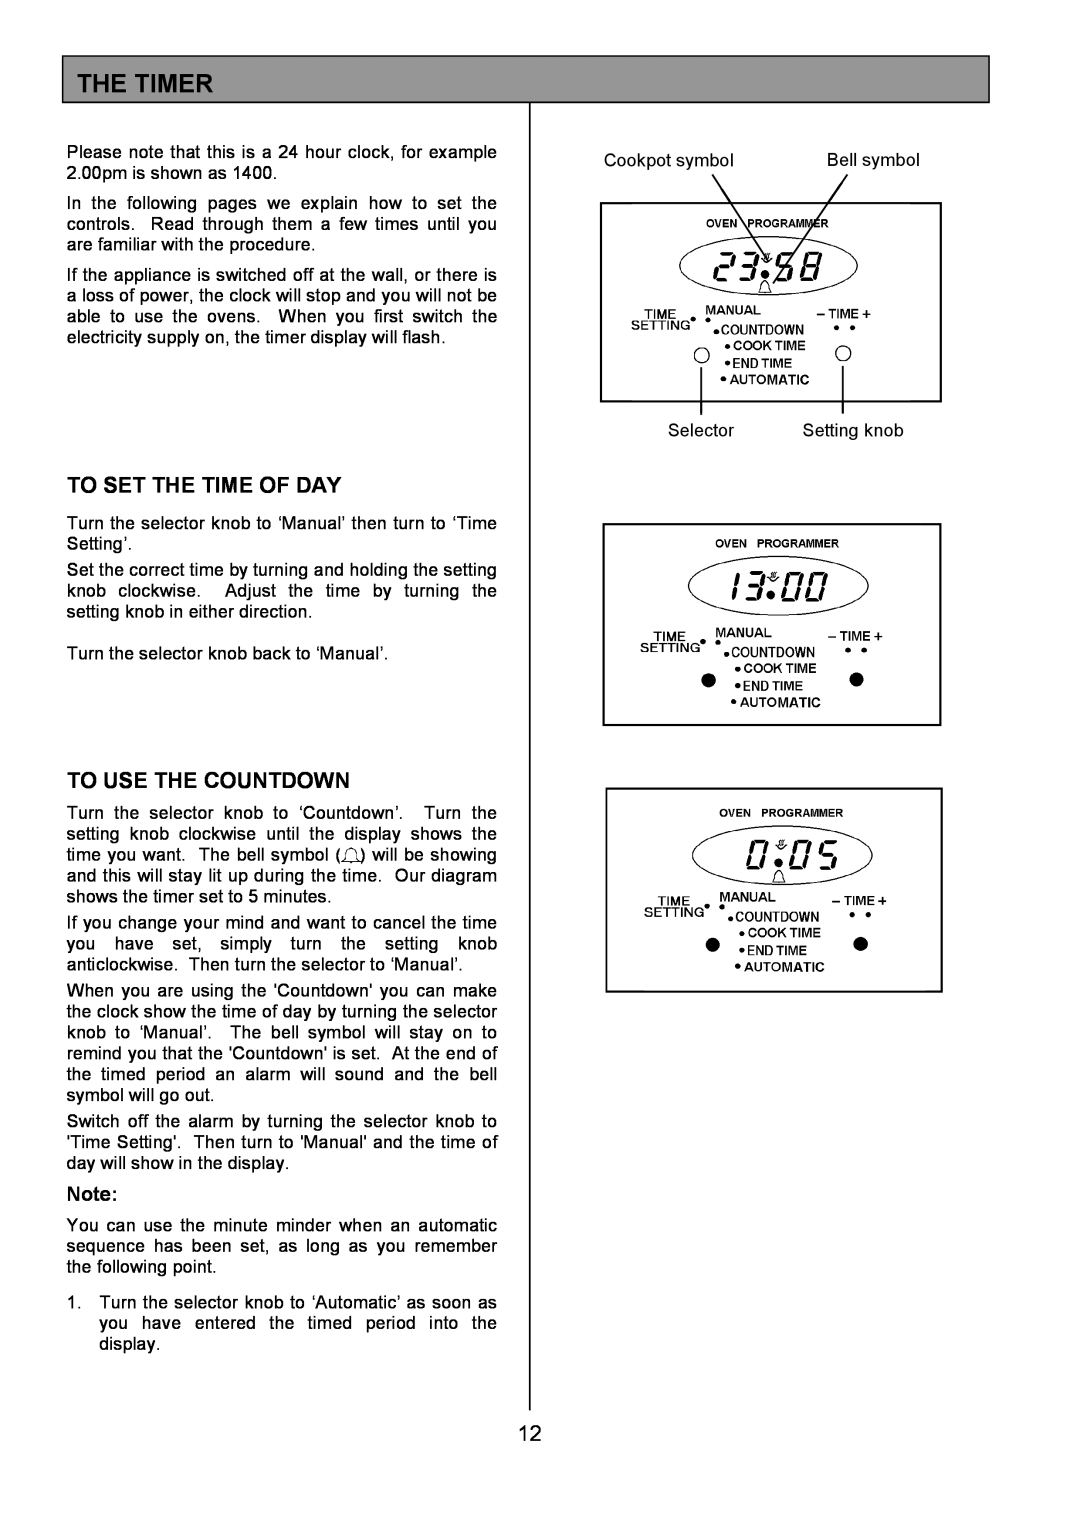 Tricity Bendix SIE531 installation instructions The Timer, To Set The Time Of Day, To Use The Countdown 